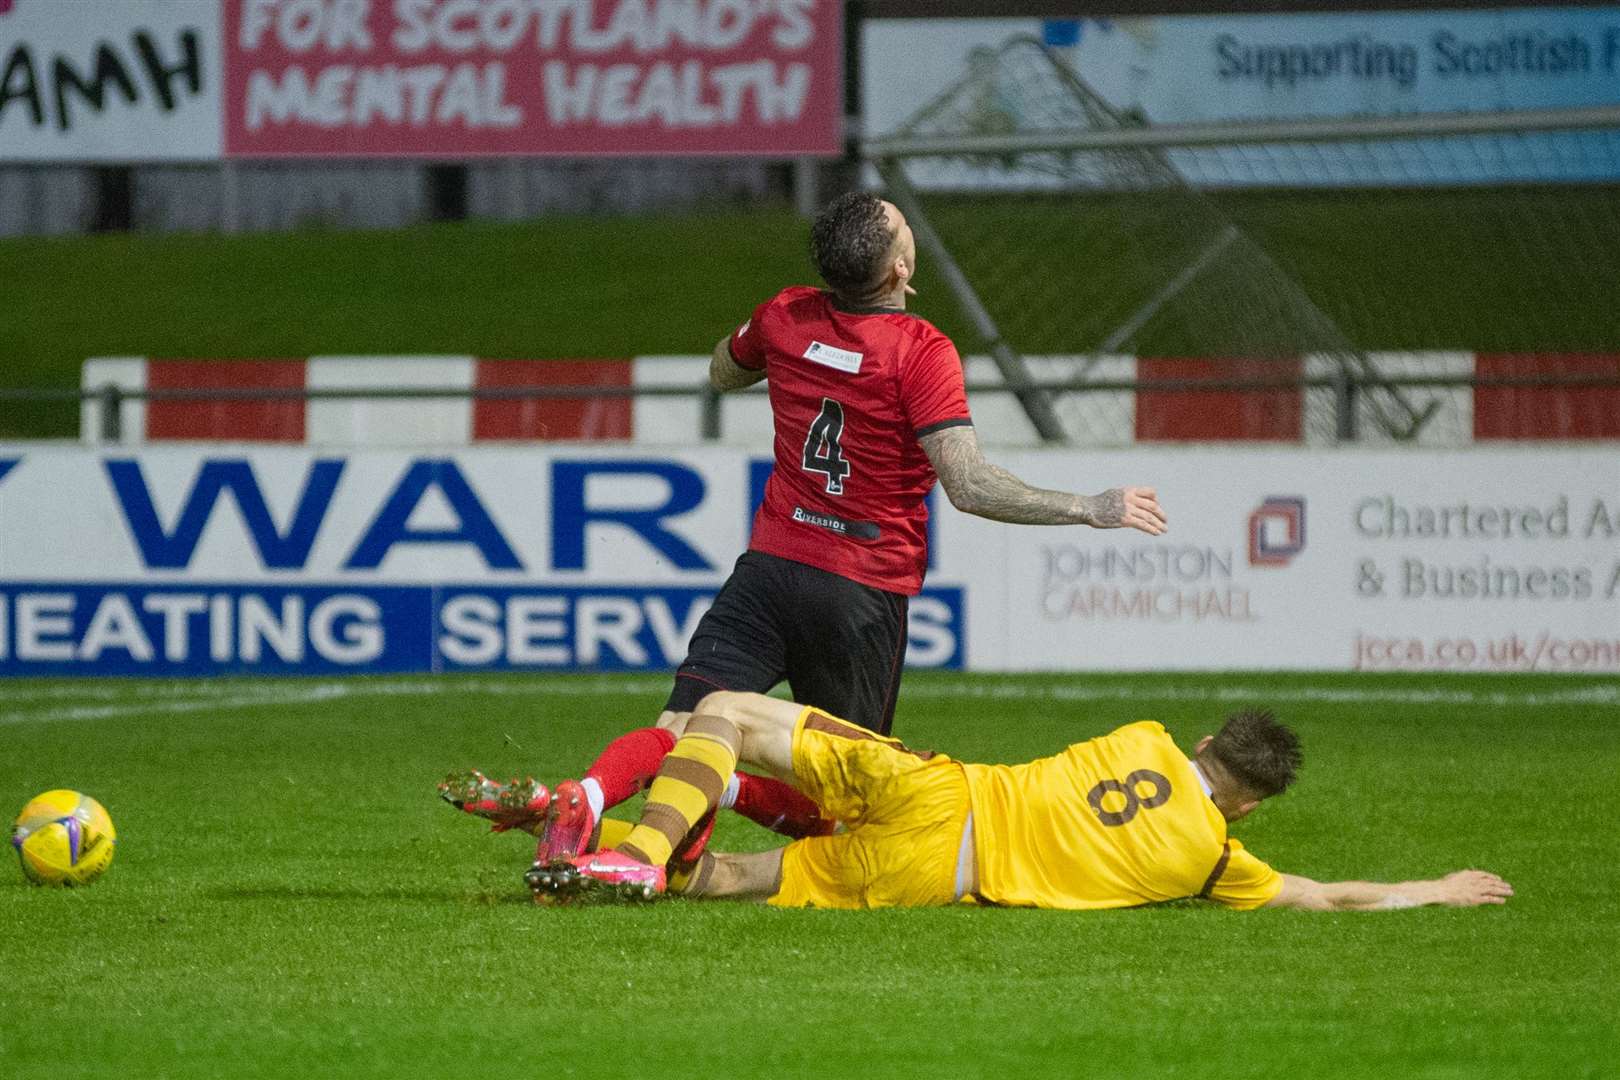 Forres new boy Jack Grant puts in a tackle on Darryl McHardy, leading to the Elgin player being stretchered off. Picture: Daniel Forsyth..